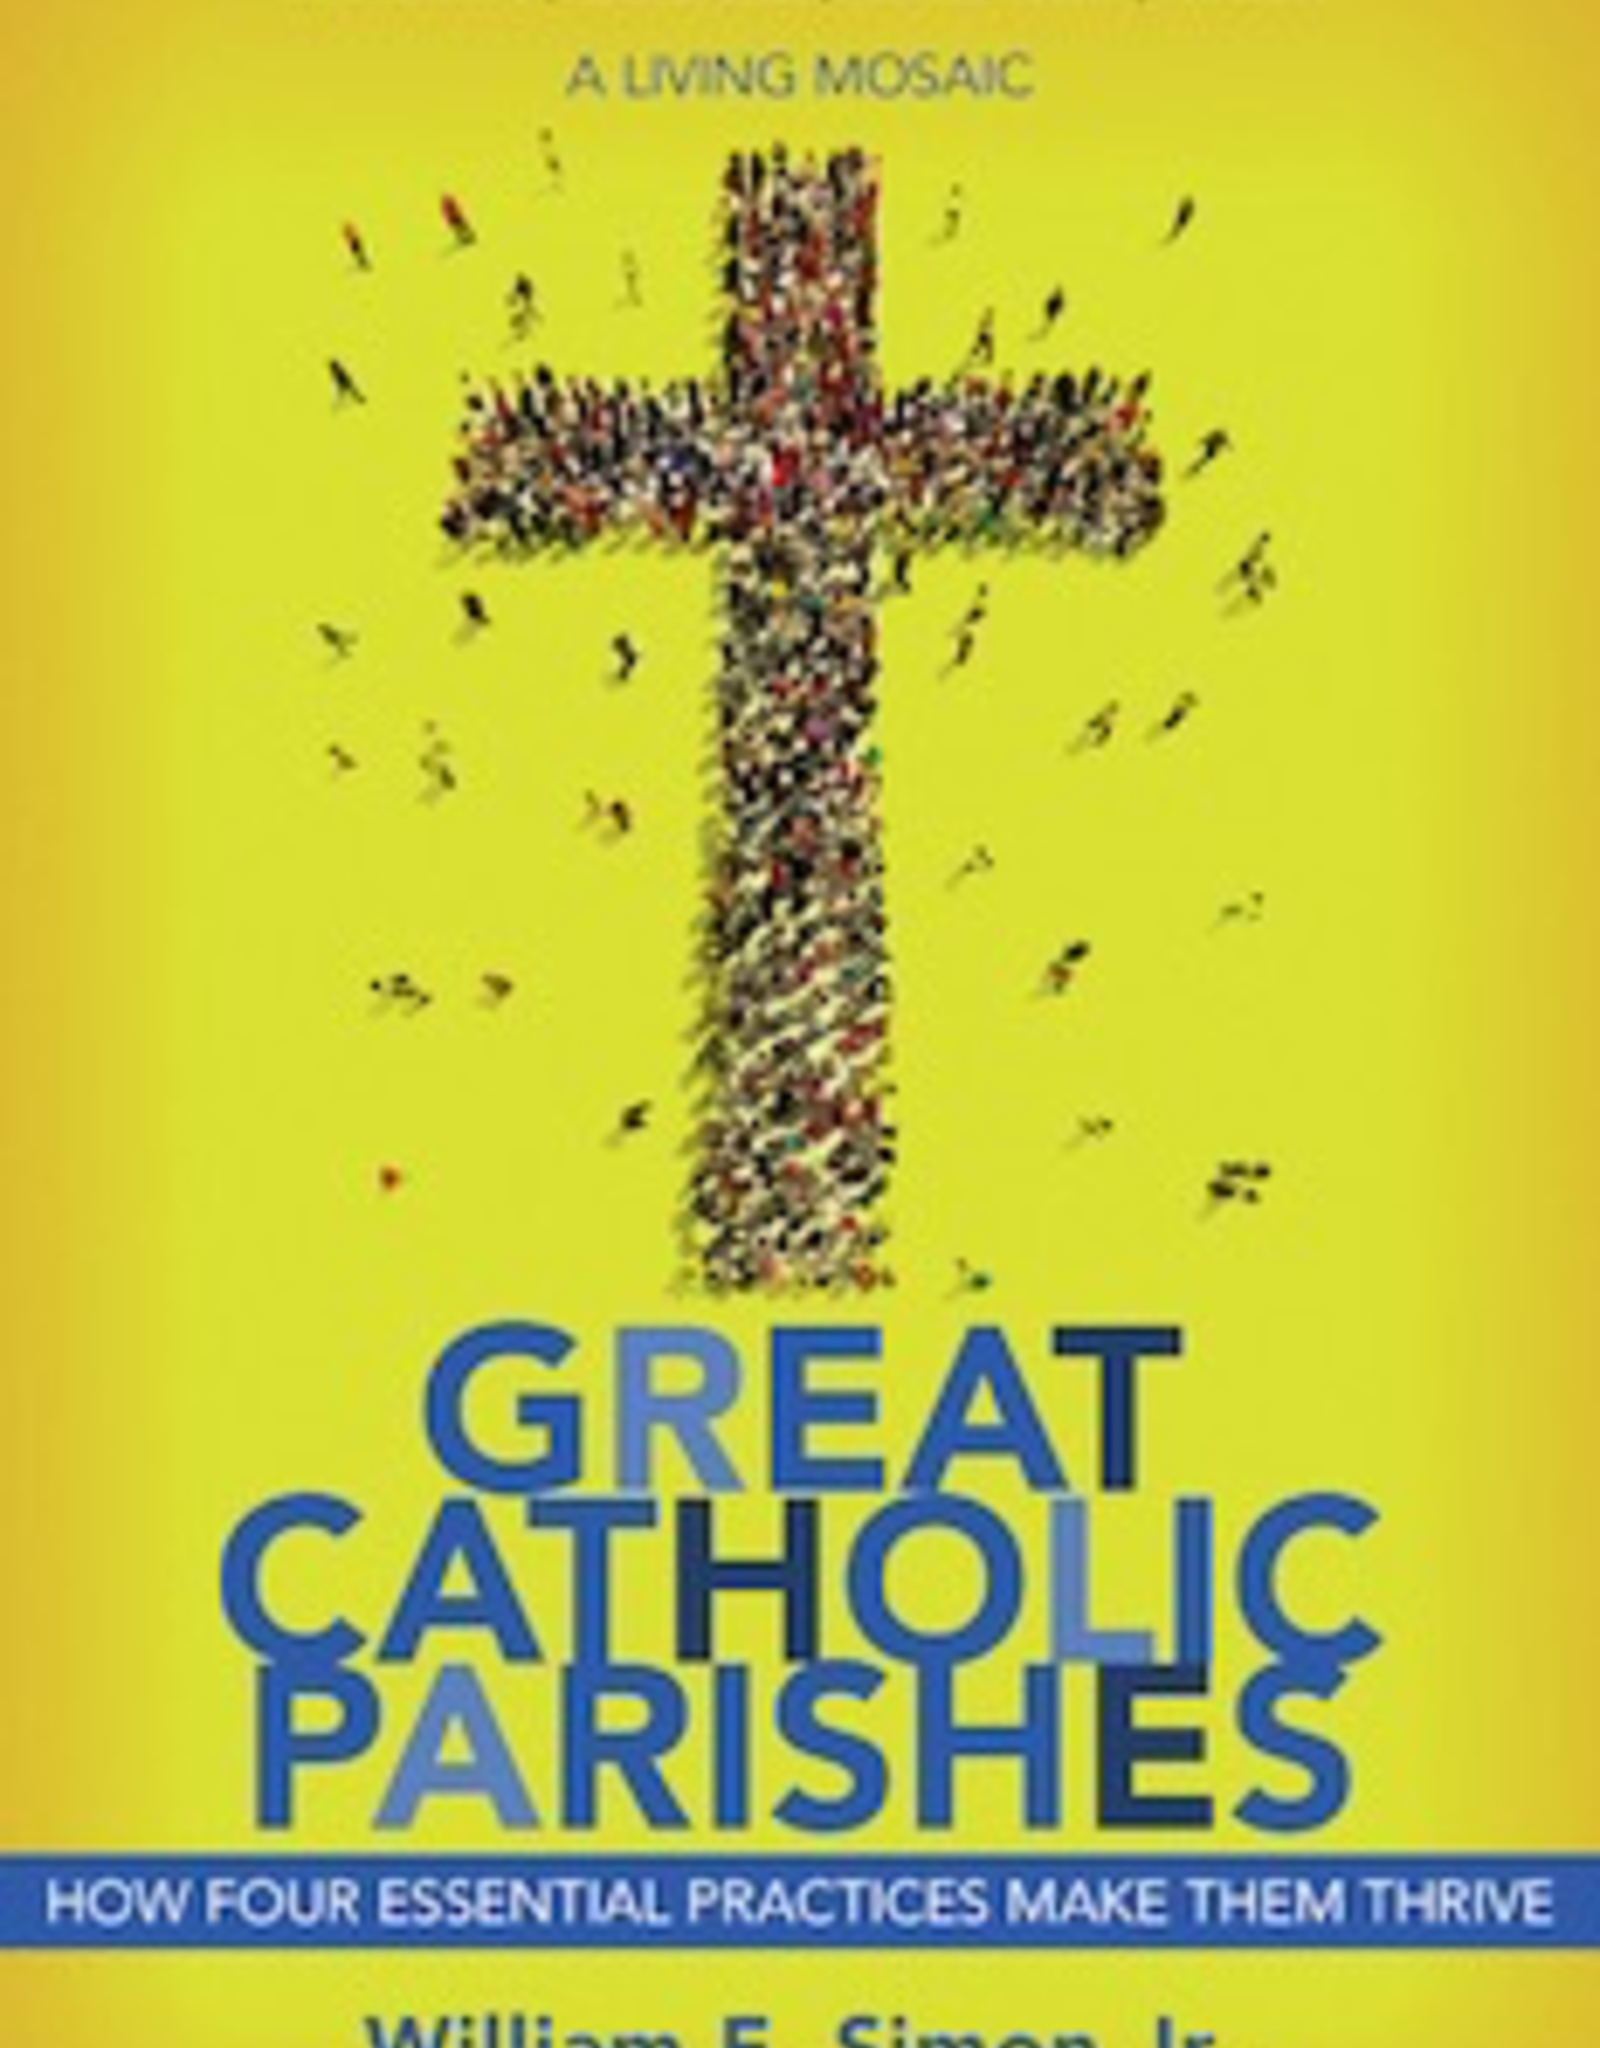 Great Catholic Parishes: How Four Essential Practices Make Them Thrive by William E. Simon, Jr.